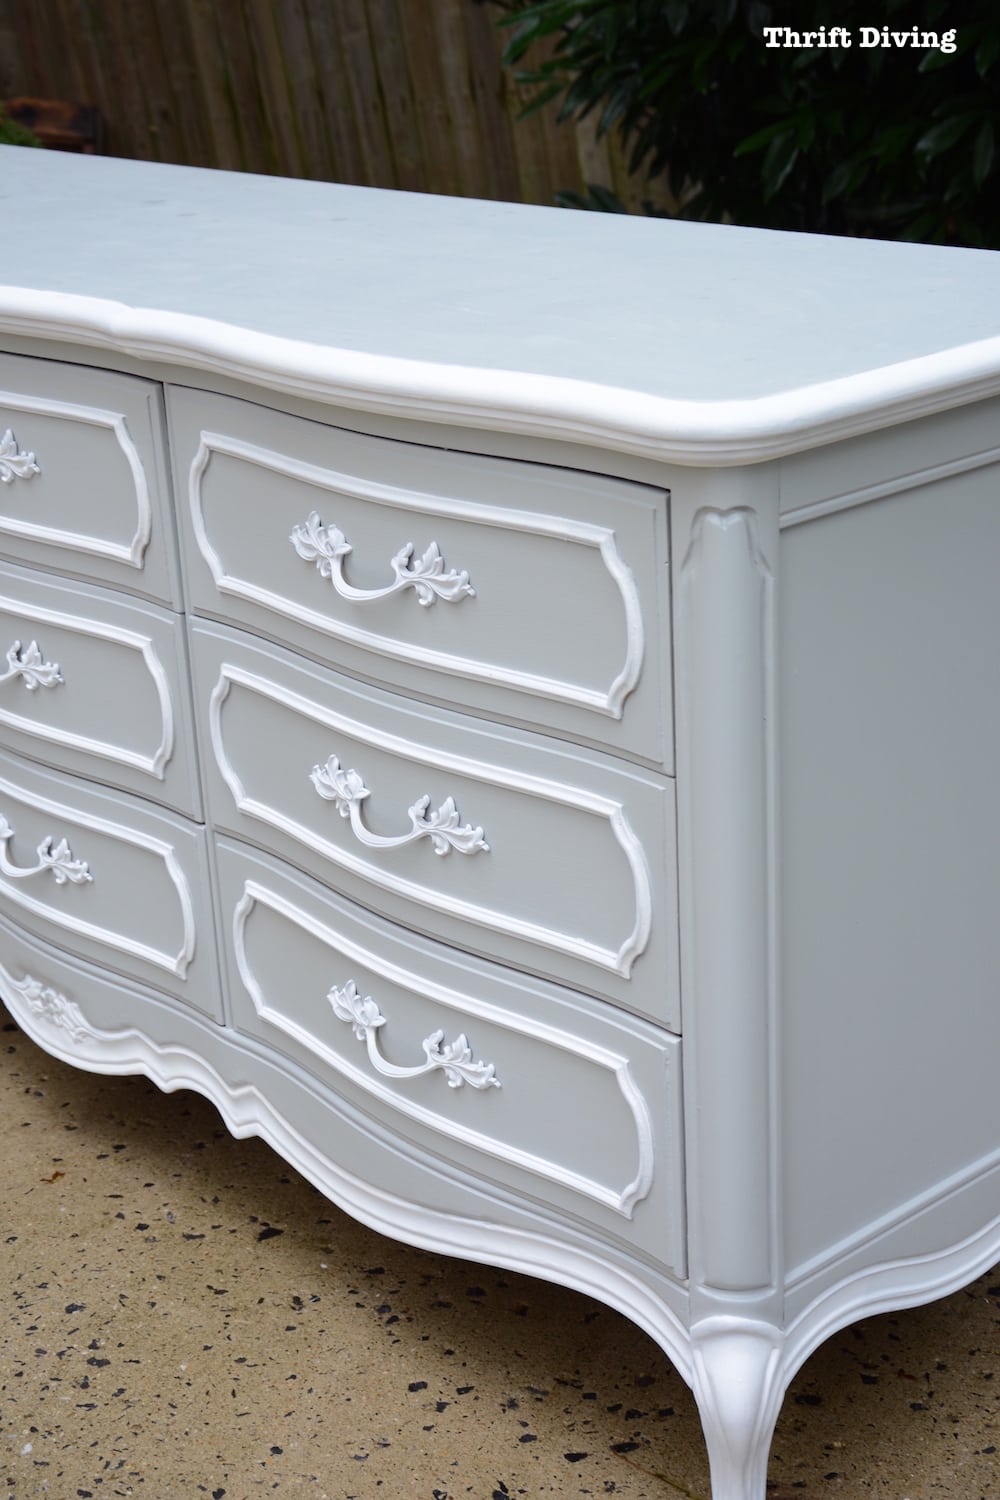 French Provincial dresser makeover from the thrift store with Beyond Paint furniture paint - Thrift Diving